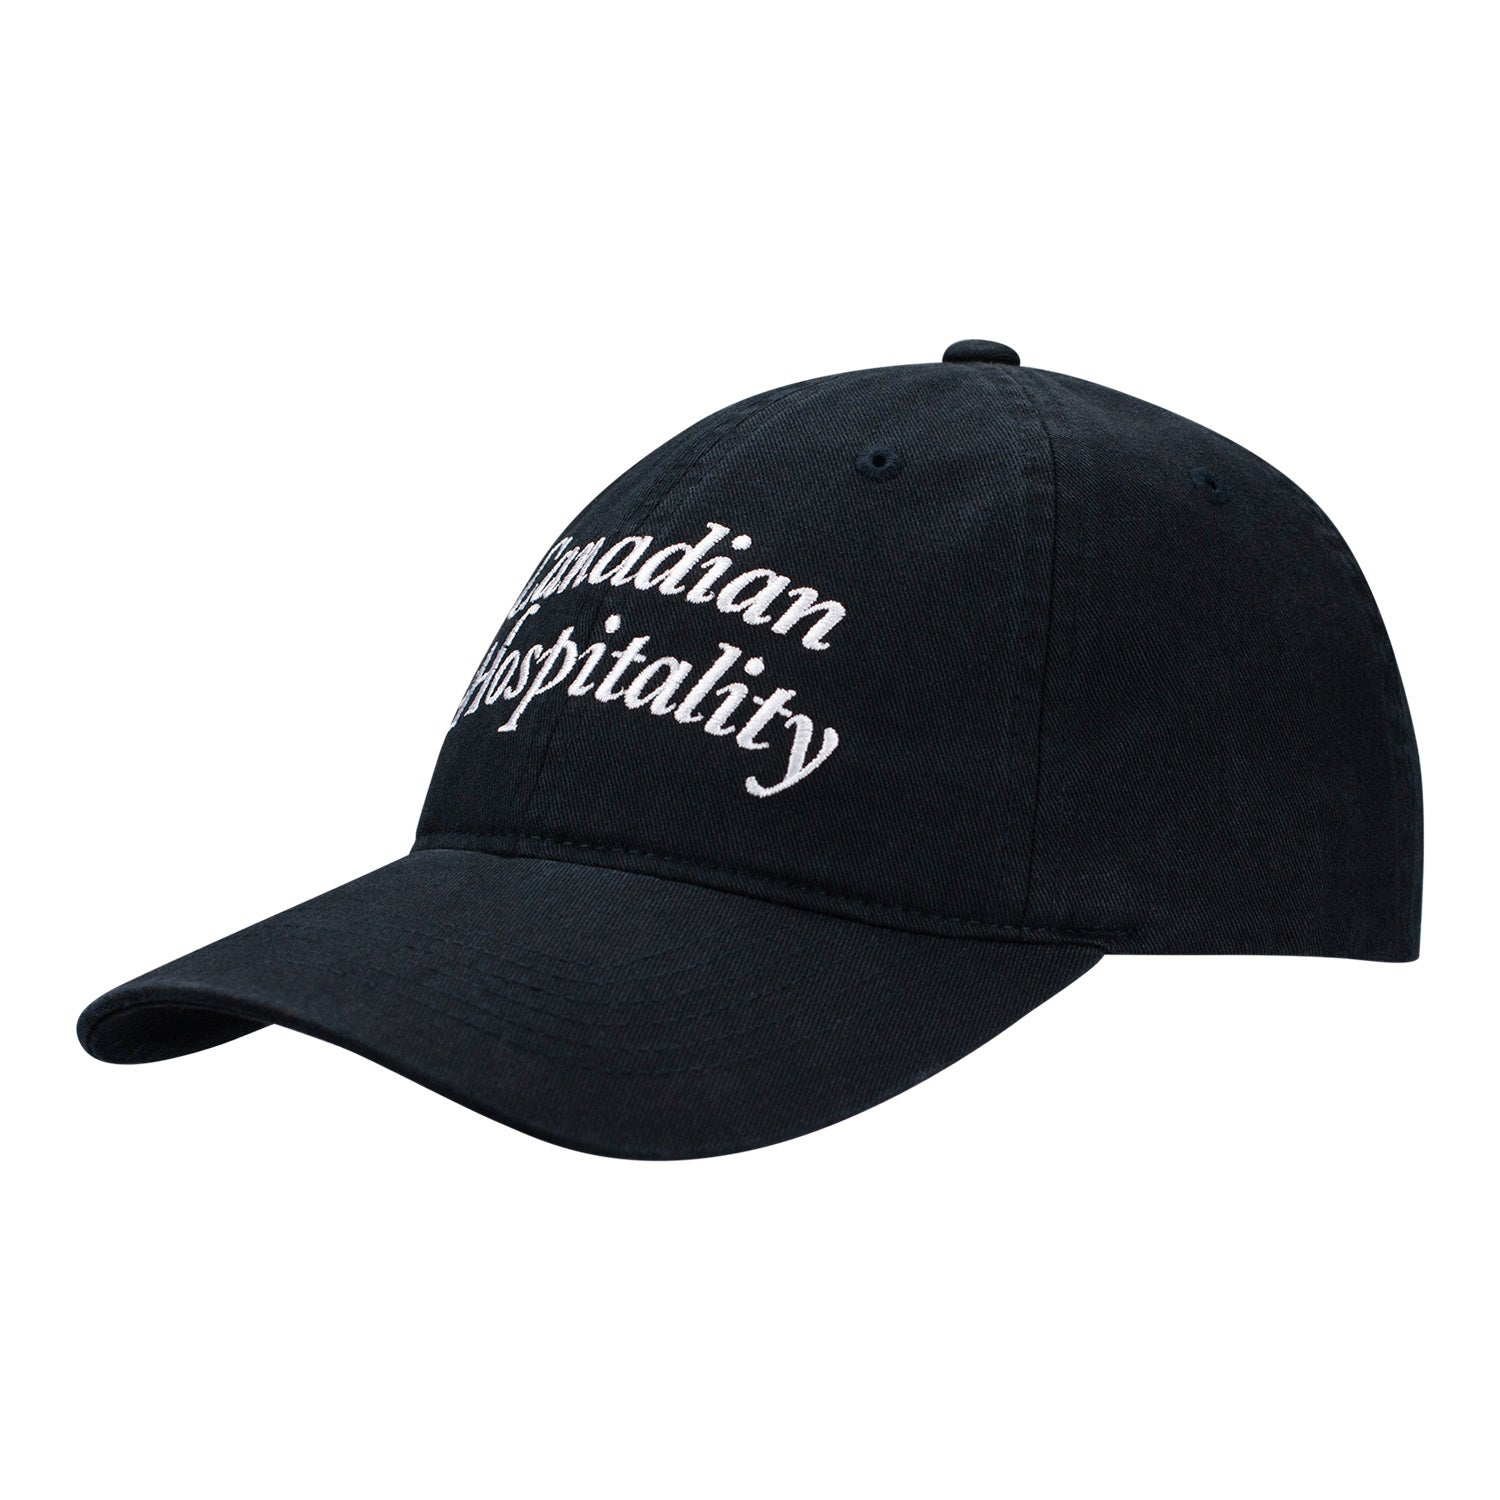 Overwatch 2 Sojourn Canadian Hospitality Black Dad Hat - Front Left Side View